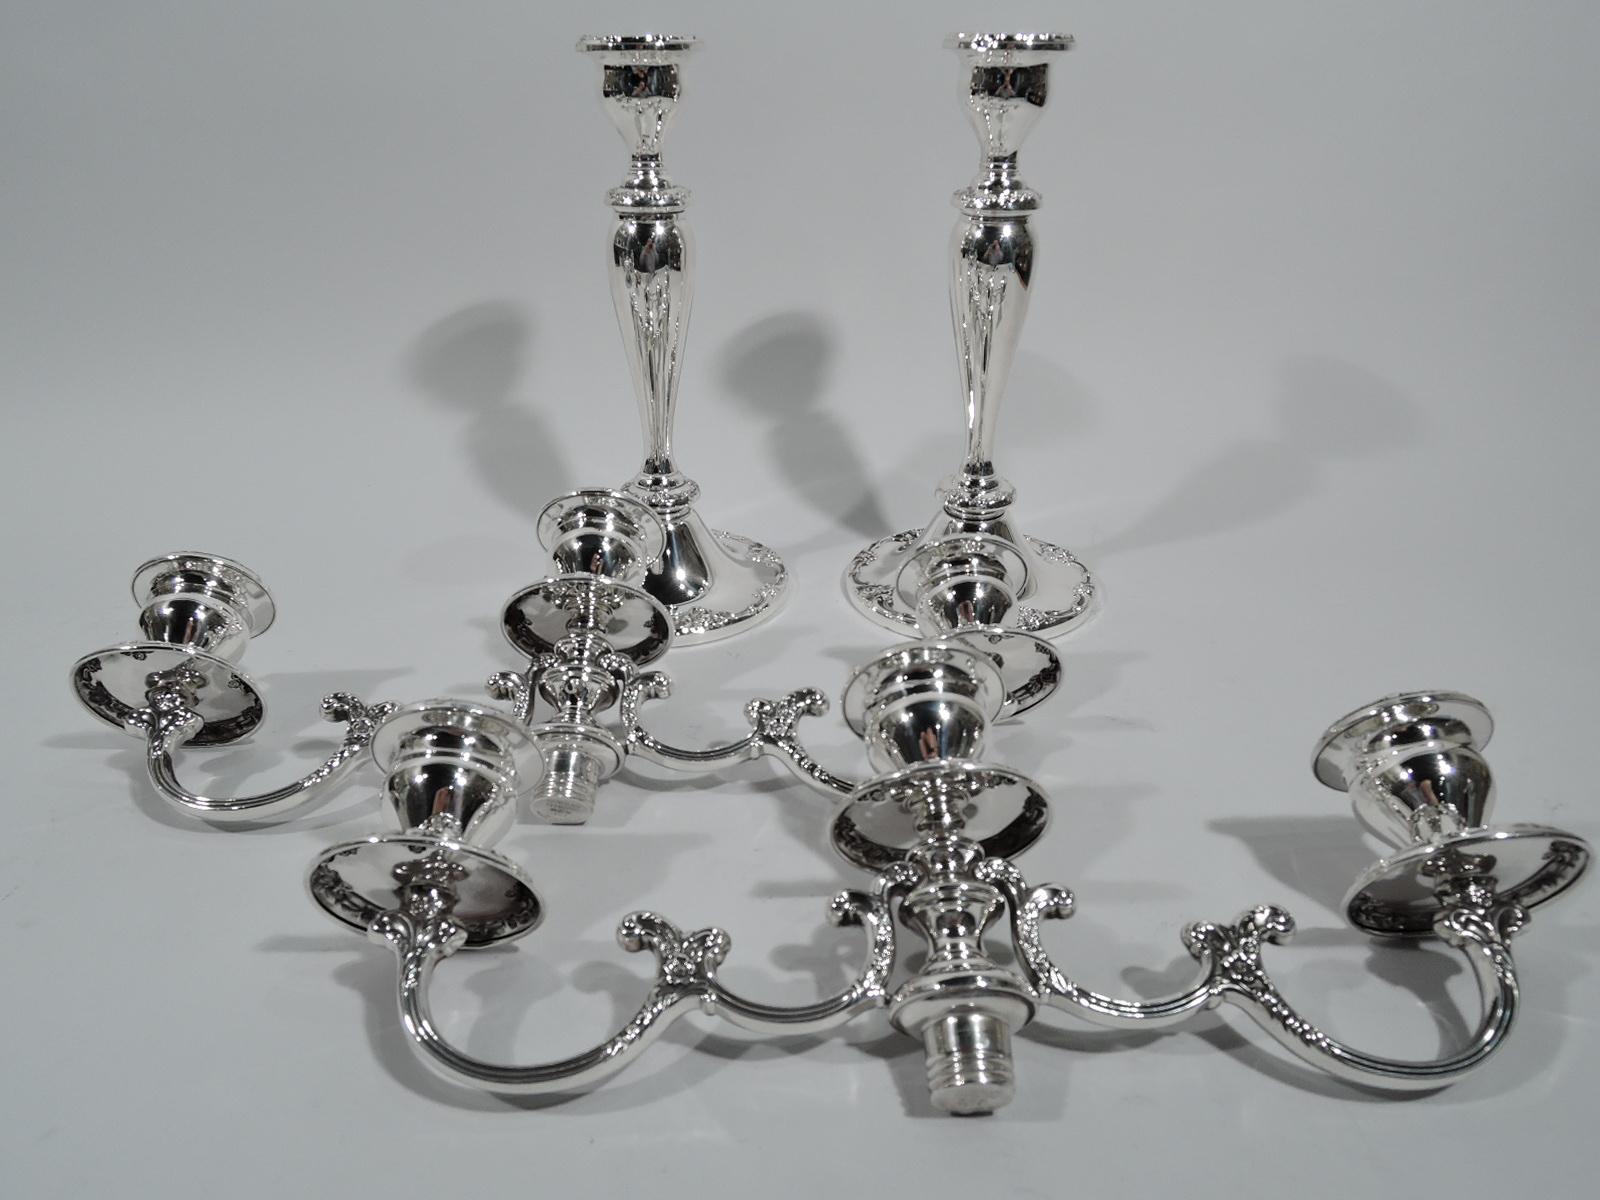 Pair of Melrose sterling silver 3-light candelabra. Made by Gorham in Providence. Each: Flanged baluster shaft on domed foot. Two scrolled arms, each terminating in single socket mounted to spool support surmounted in same. Raised scroll and floral